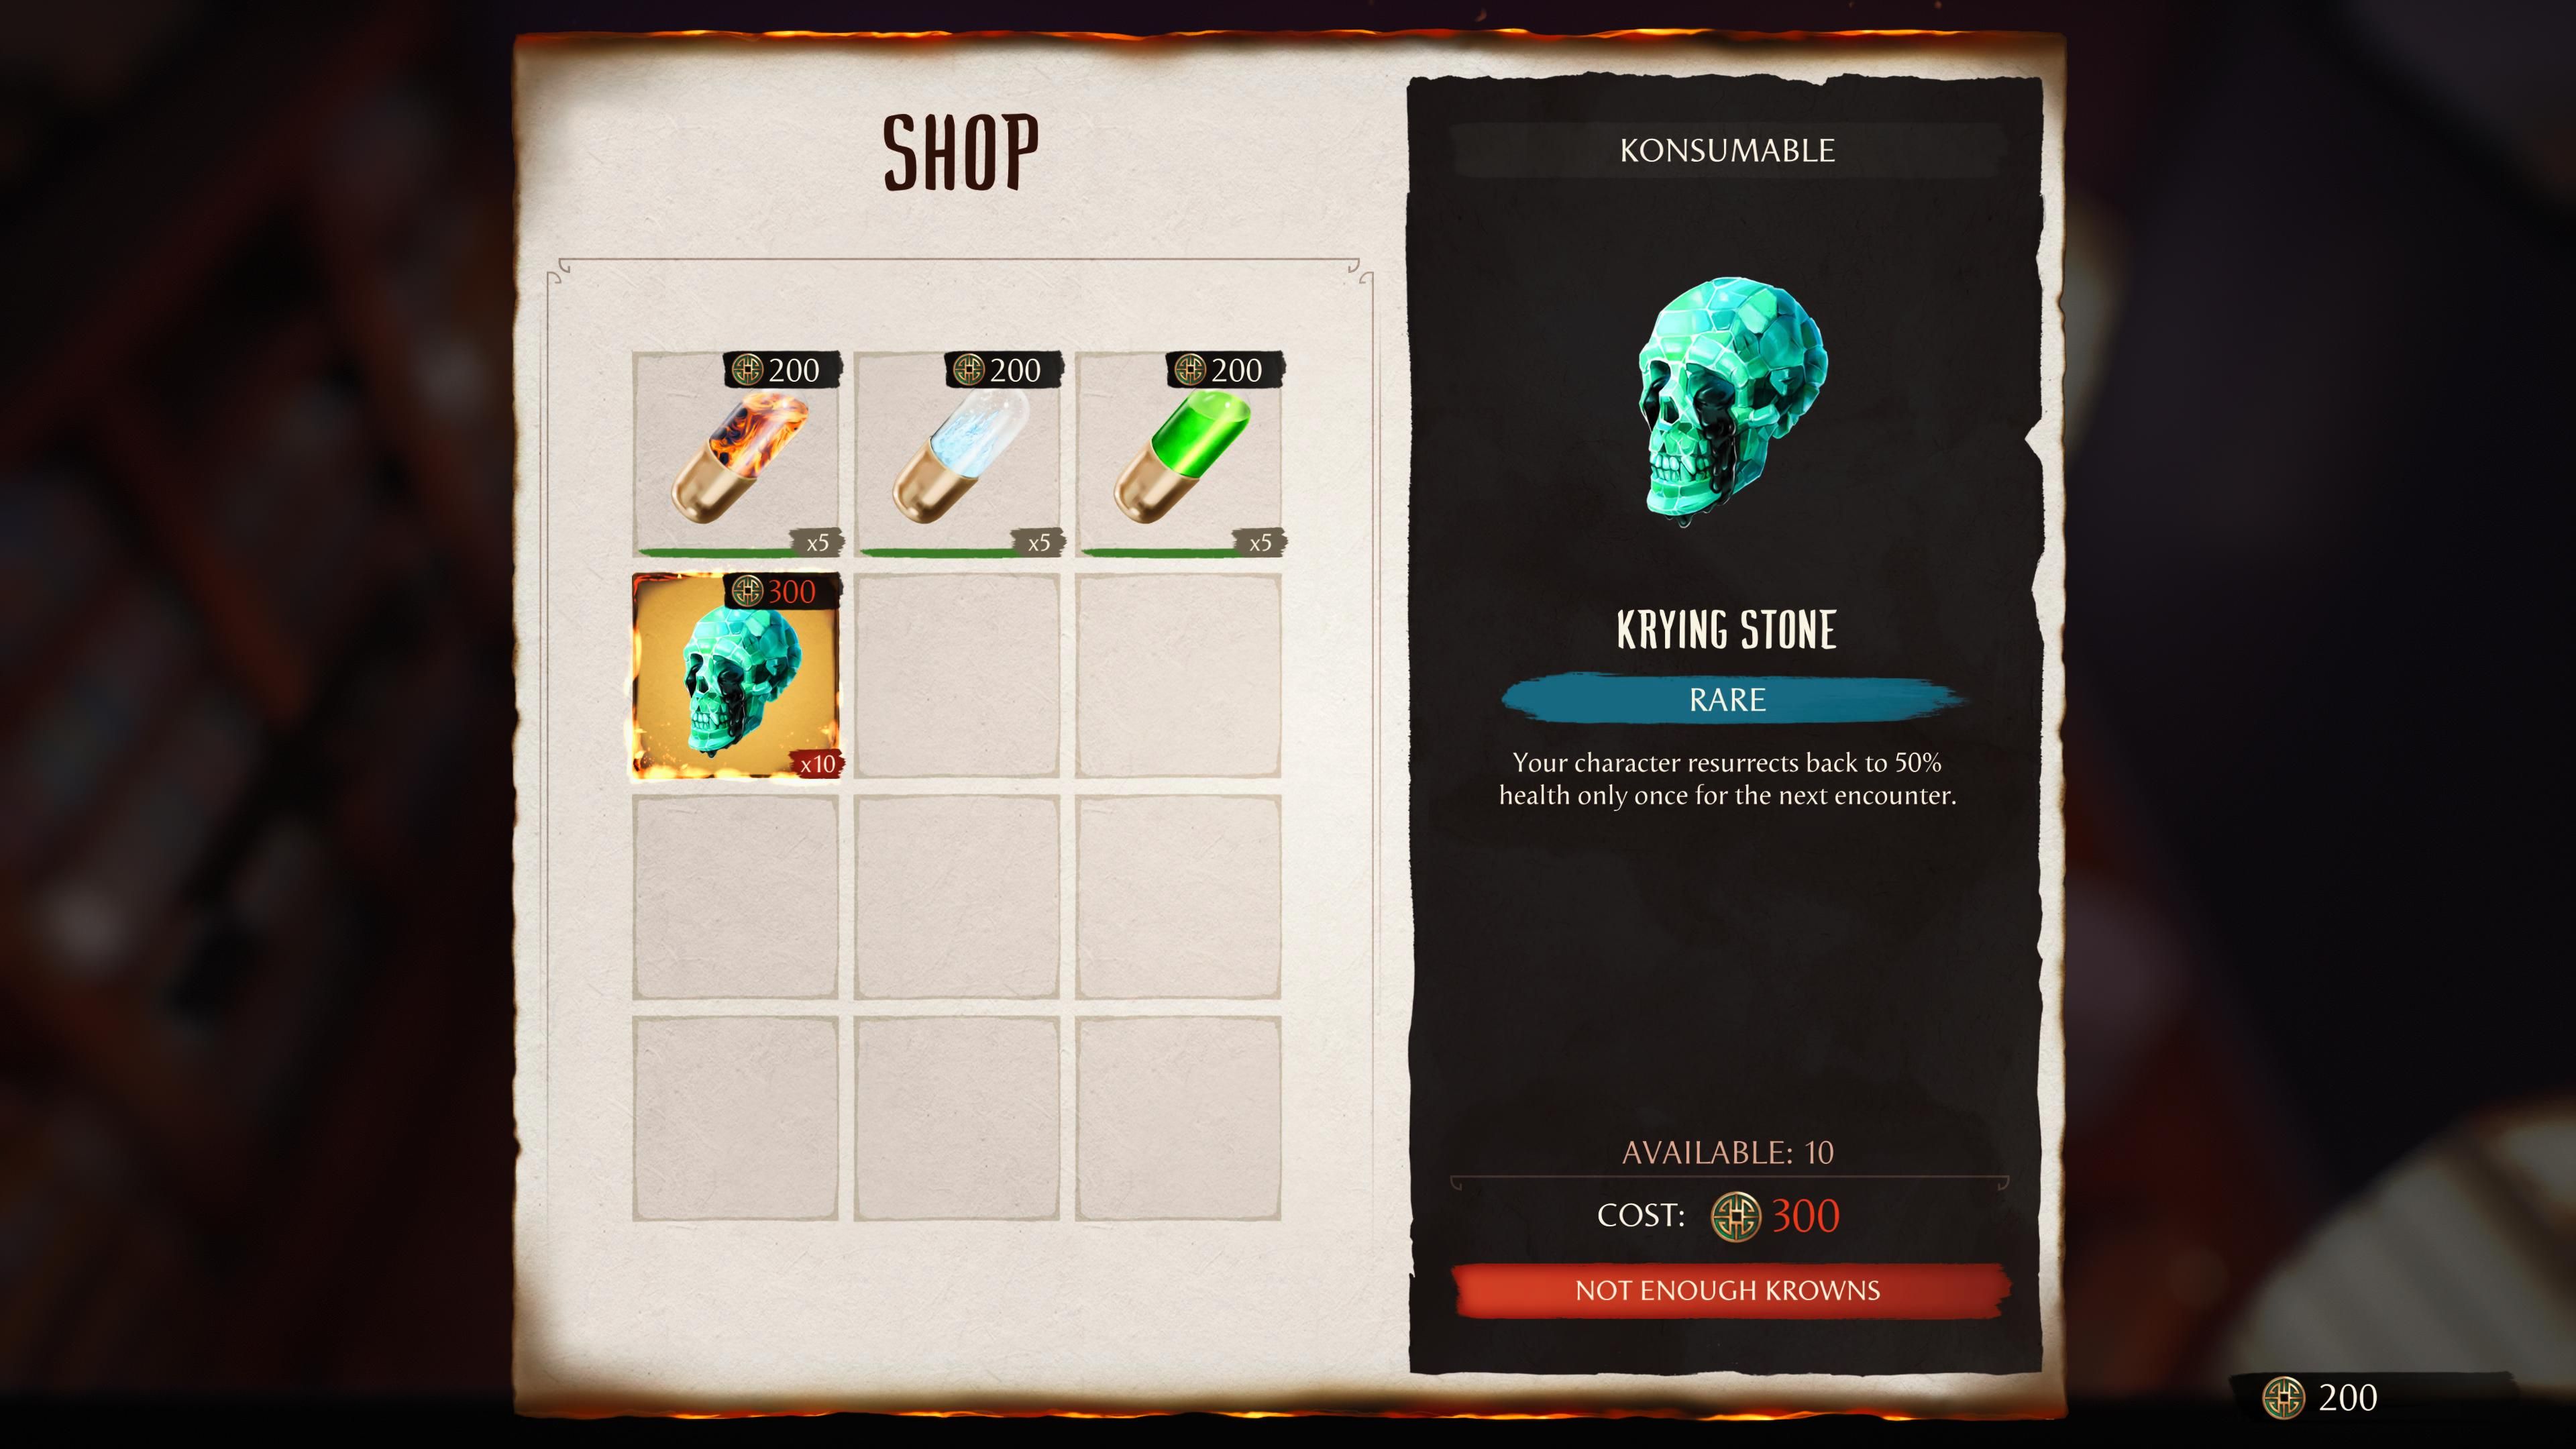 A screenshot showing the first Shop you can find in MK 1's Invasion Mode. There are four konsumables available.